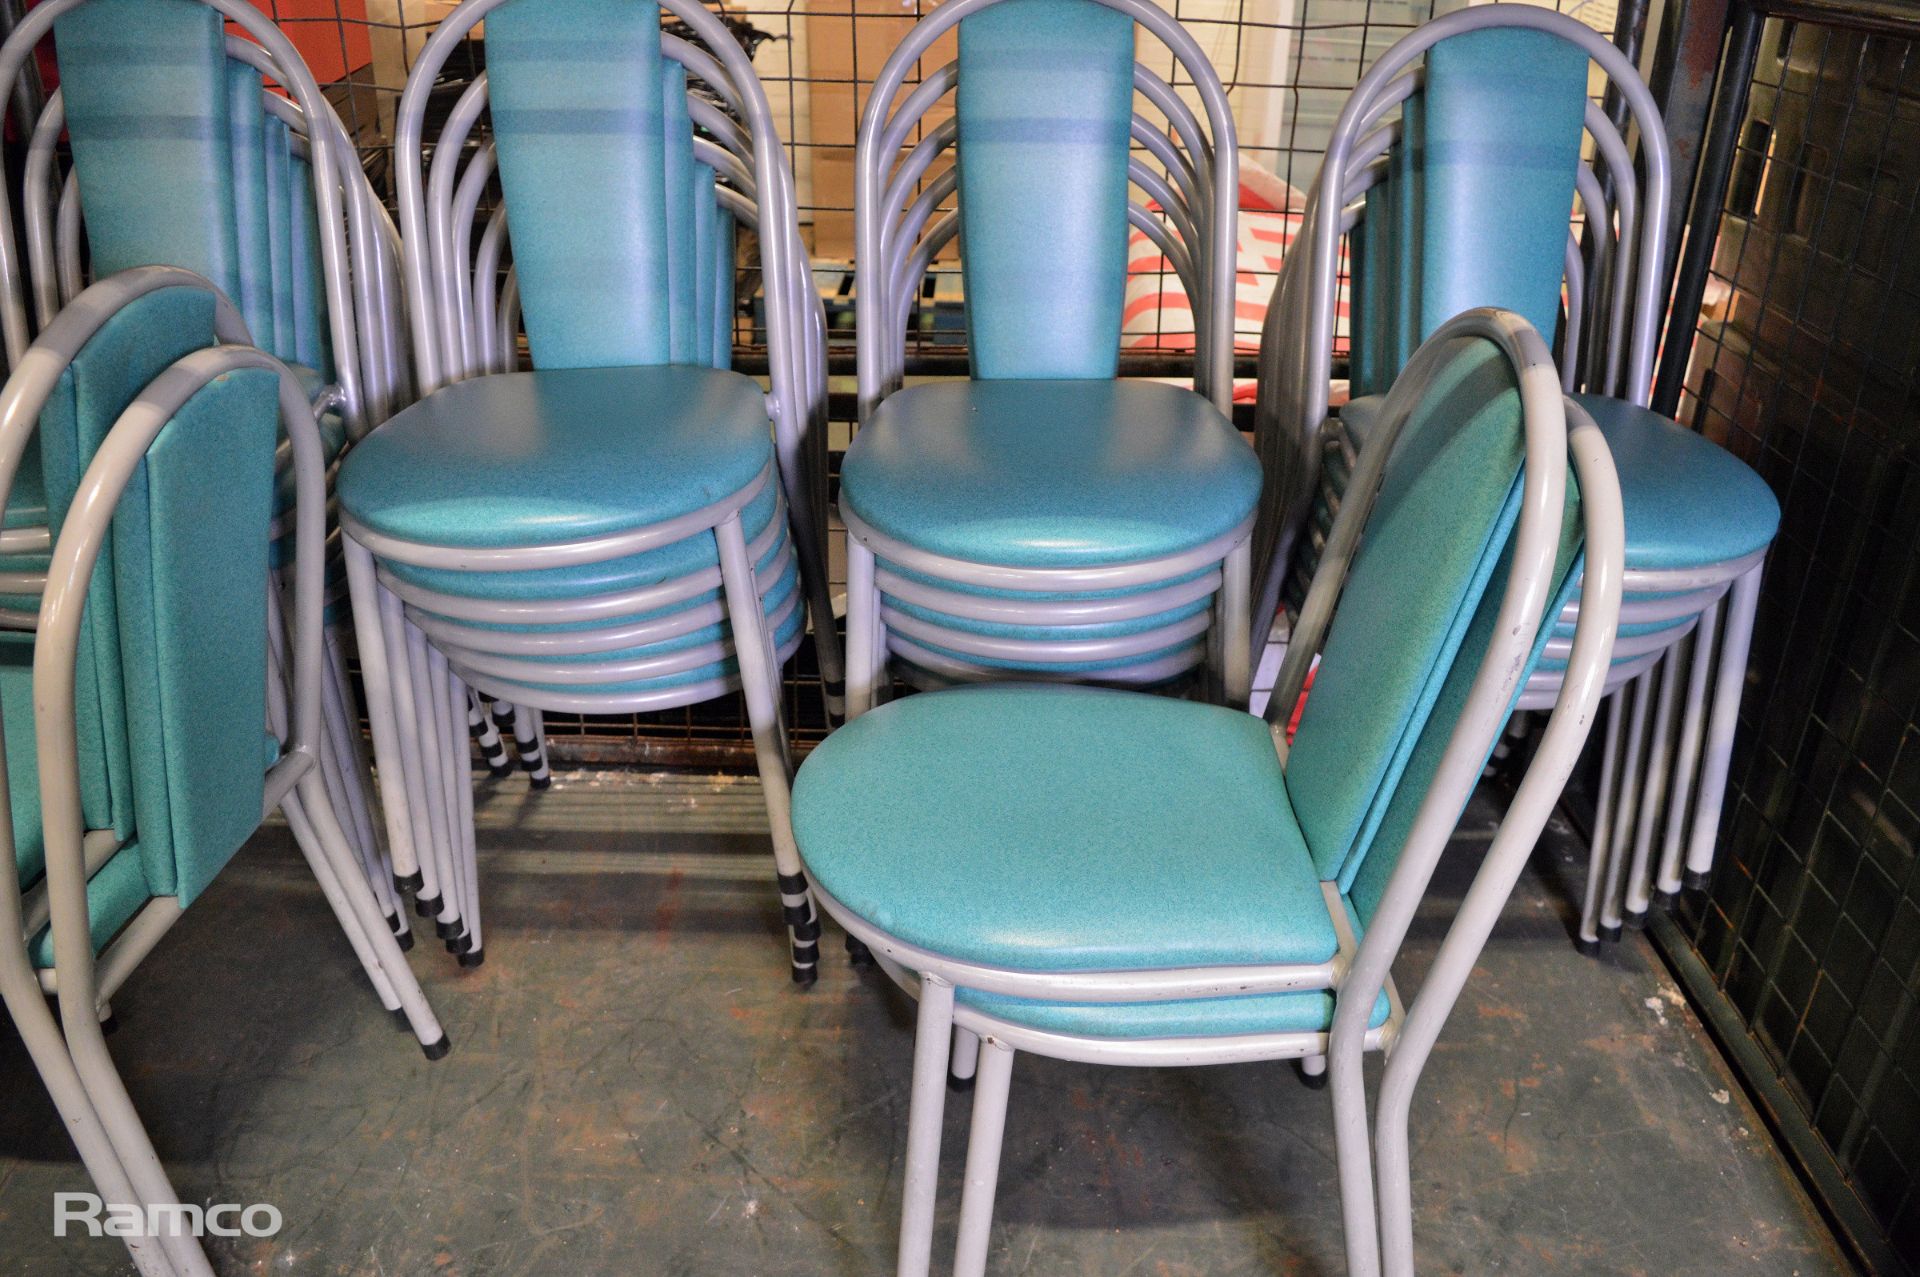 24x Chair Gray Metal Frame with green Padded Seats - Image 2 of 5